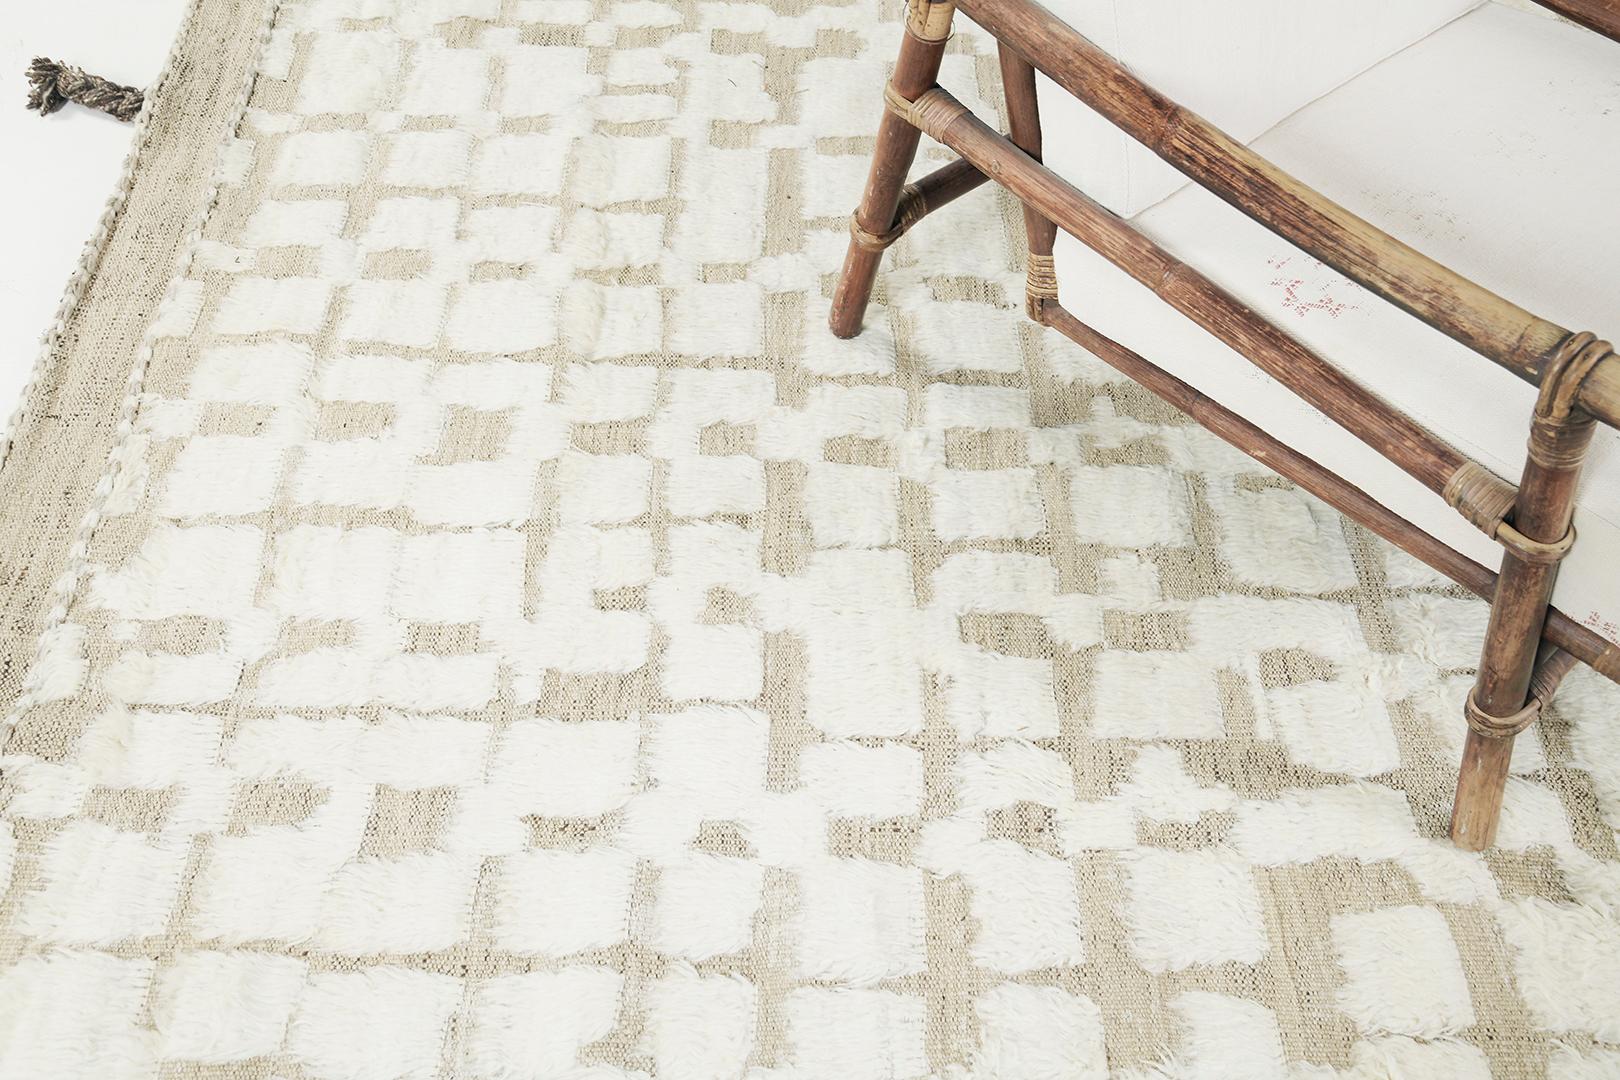 Anzade’ is a breathtaking rug in our Atlas Collection that features a plush gray field that entices the viewer to sink their feet into its embossed ivory pile weave. Accentuated by uneven gray square patterns which makes this rug mesmerizing in all